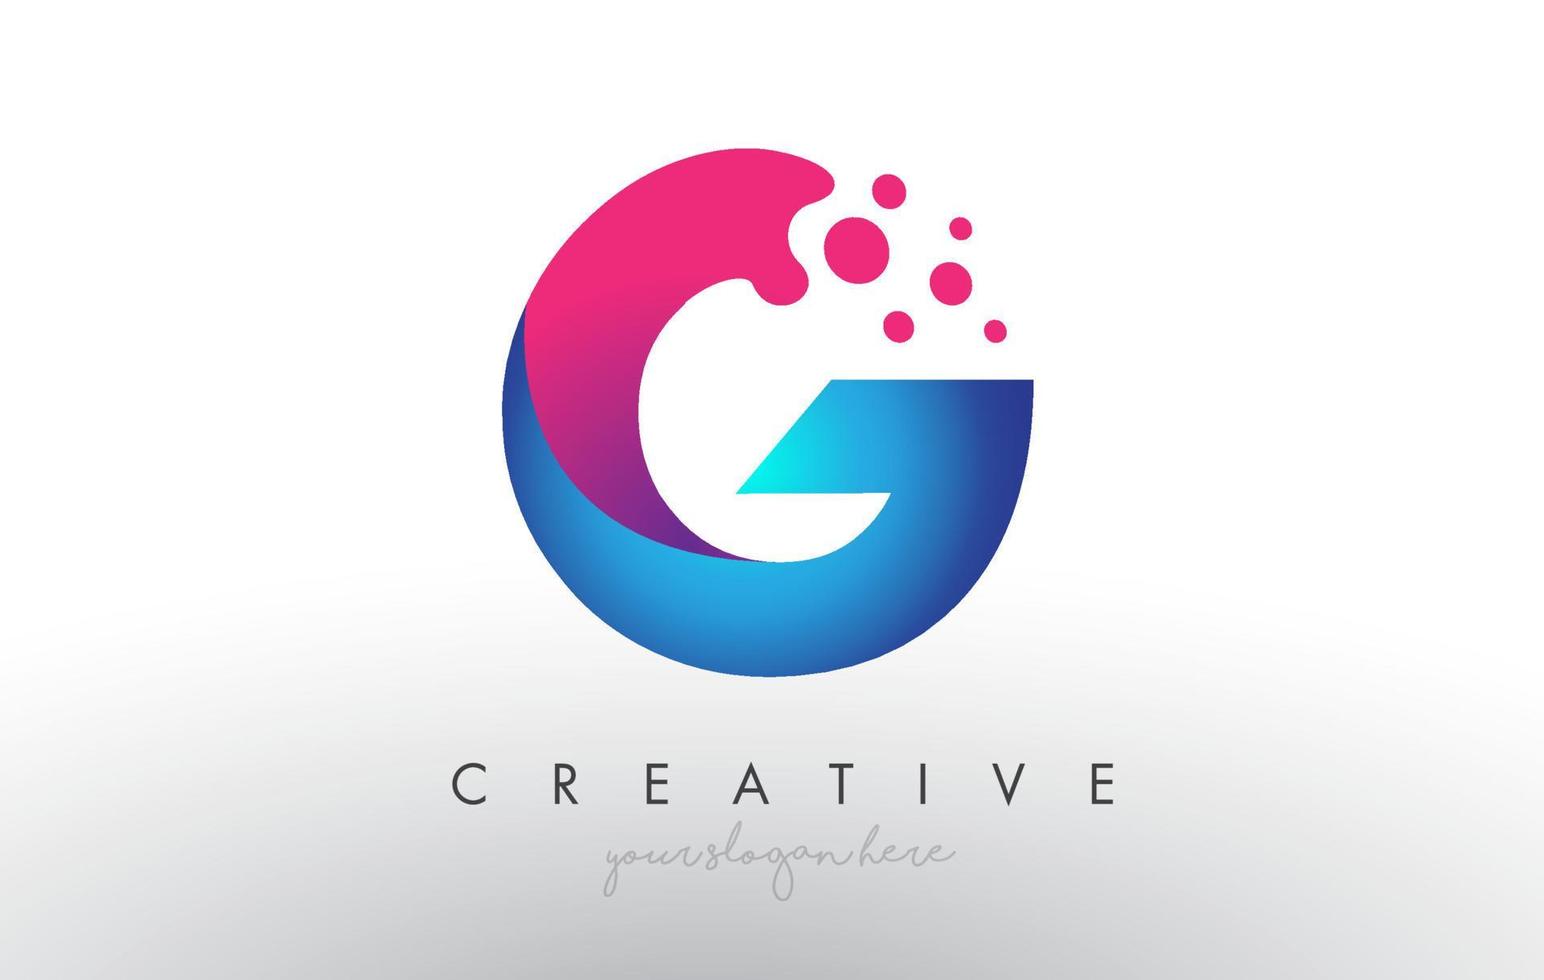 G Letter Design with Creative Dots Bubble Circles and Blue Pink Colors vector